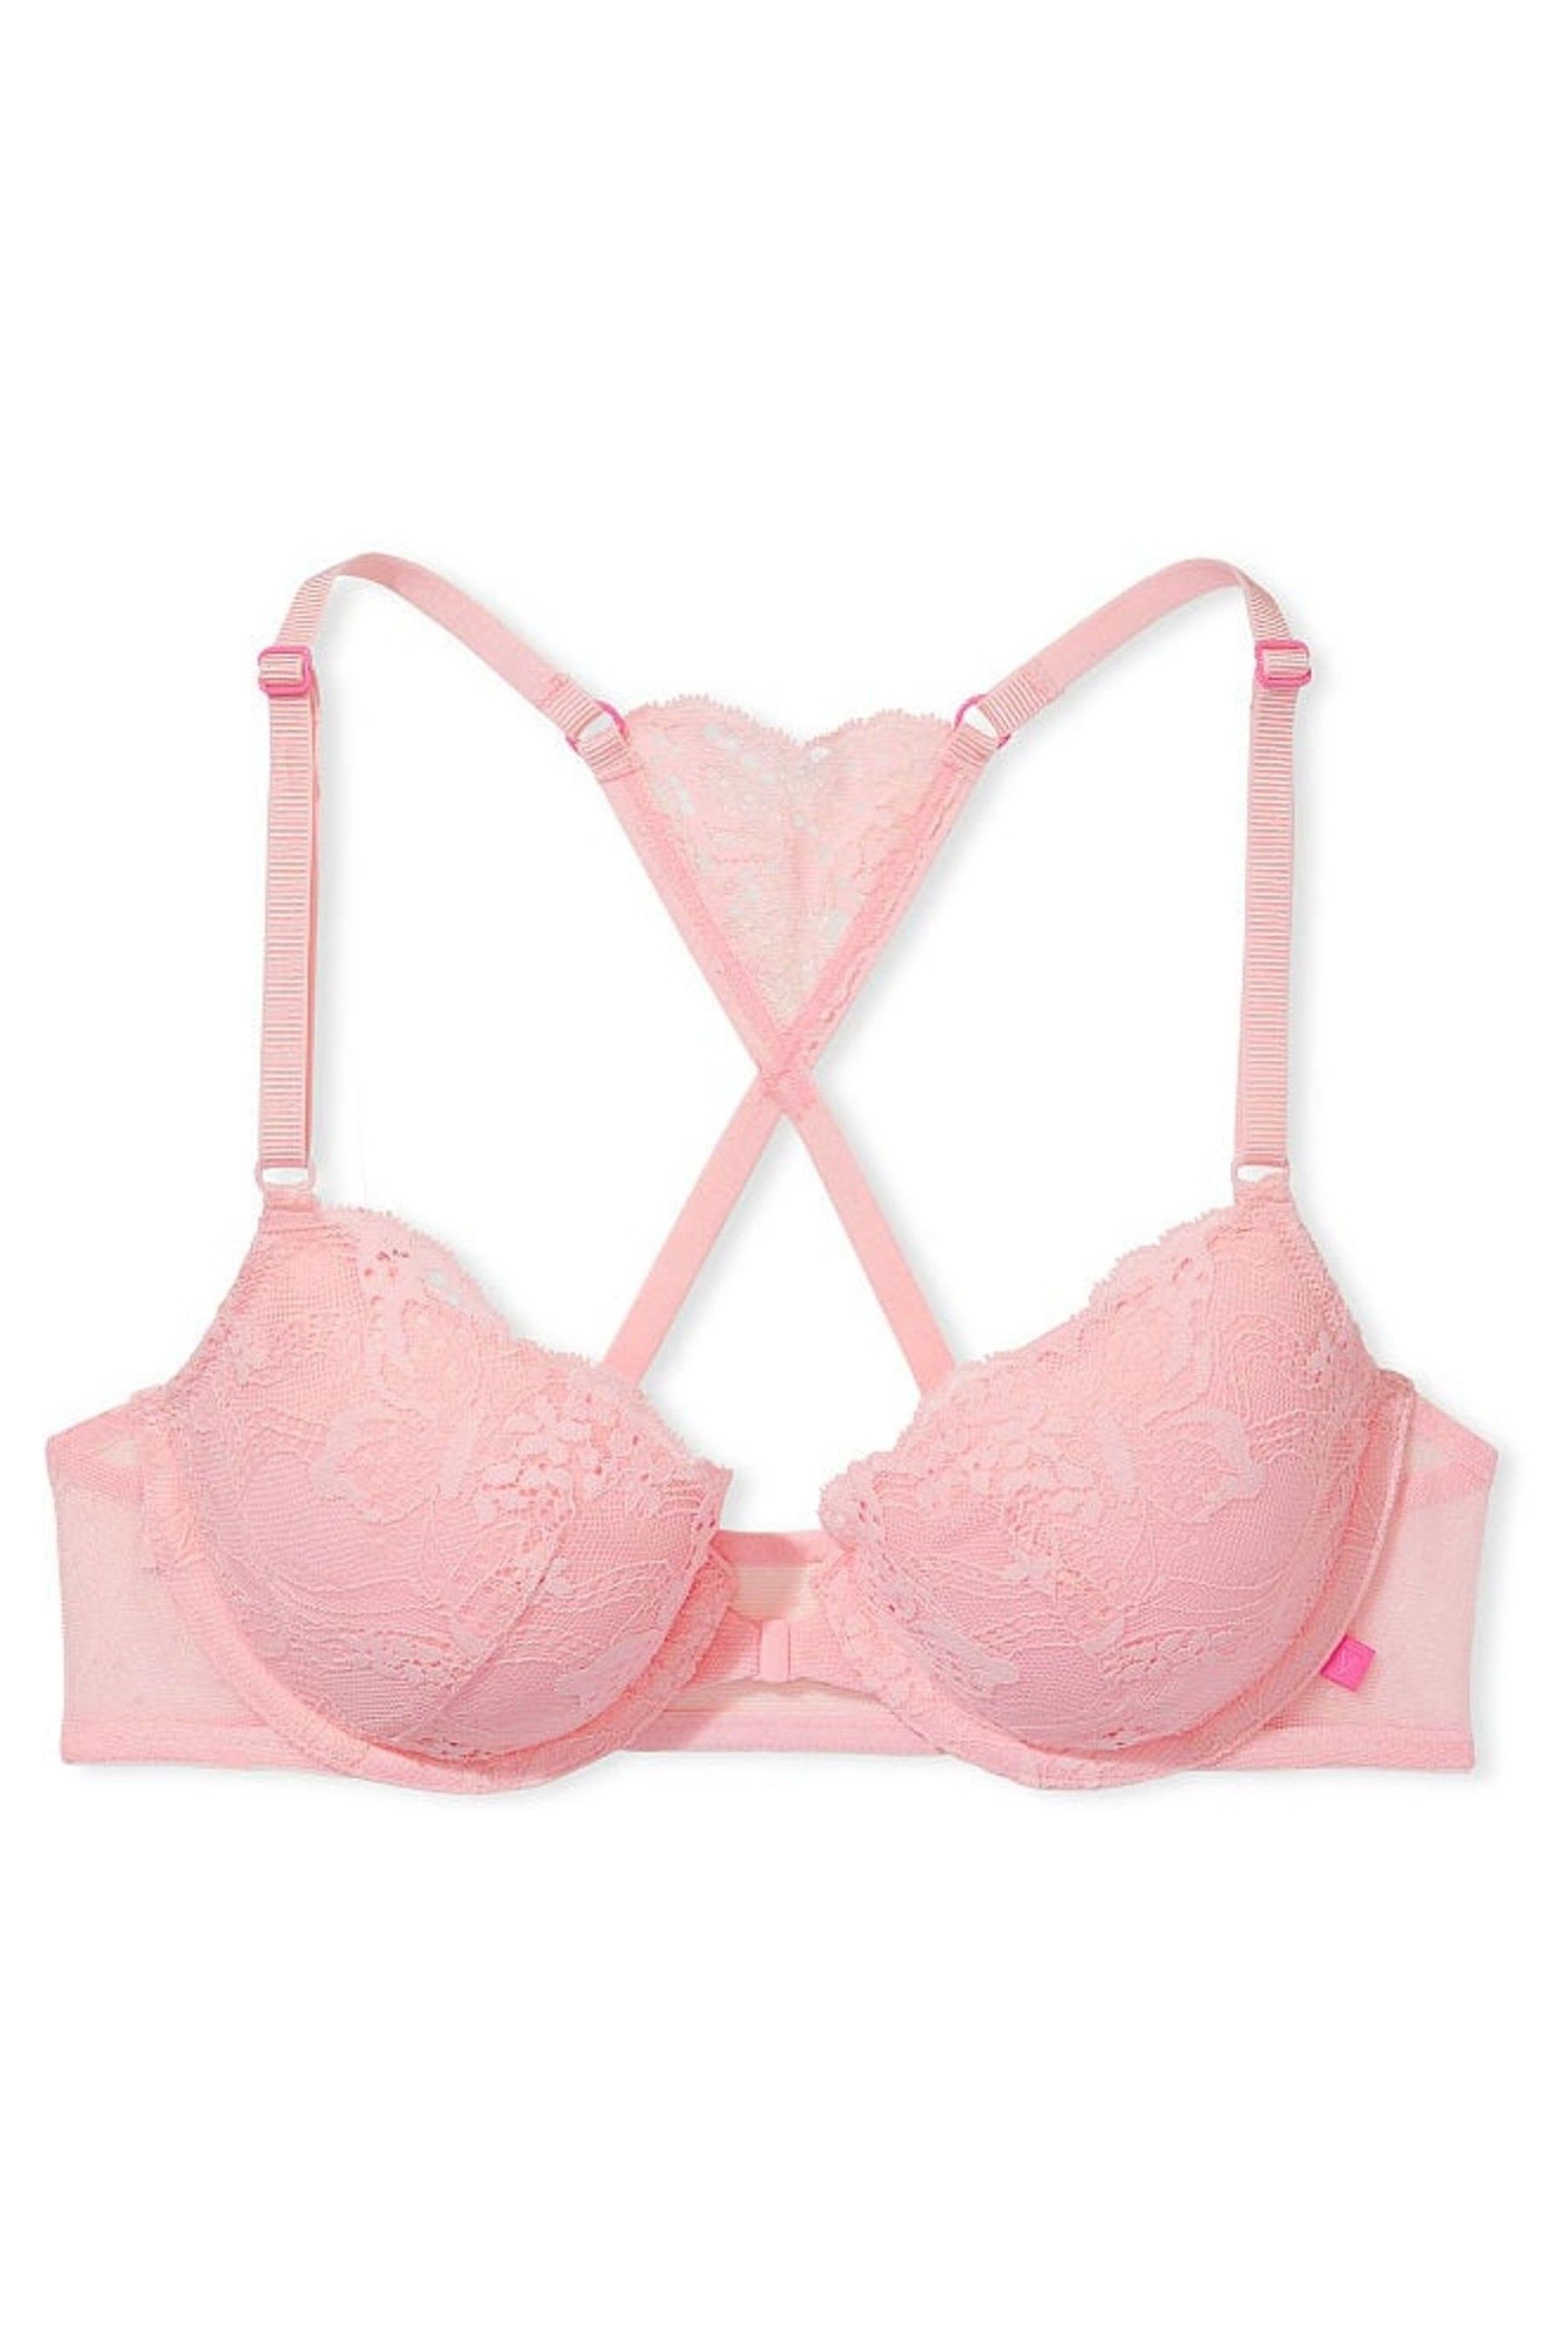 Buy Victoria's Secret Lace Front Close Push Up Bra from the Victoria's ...